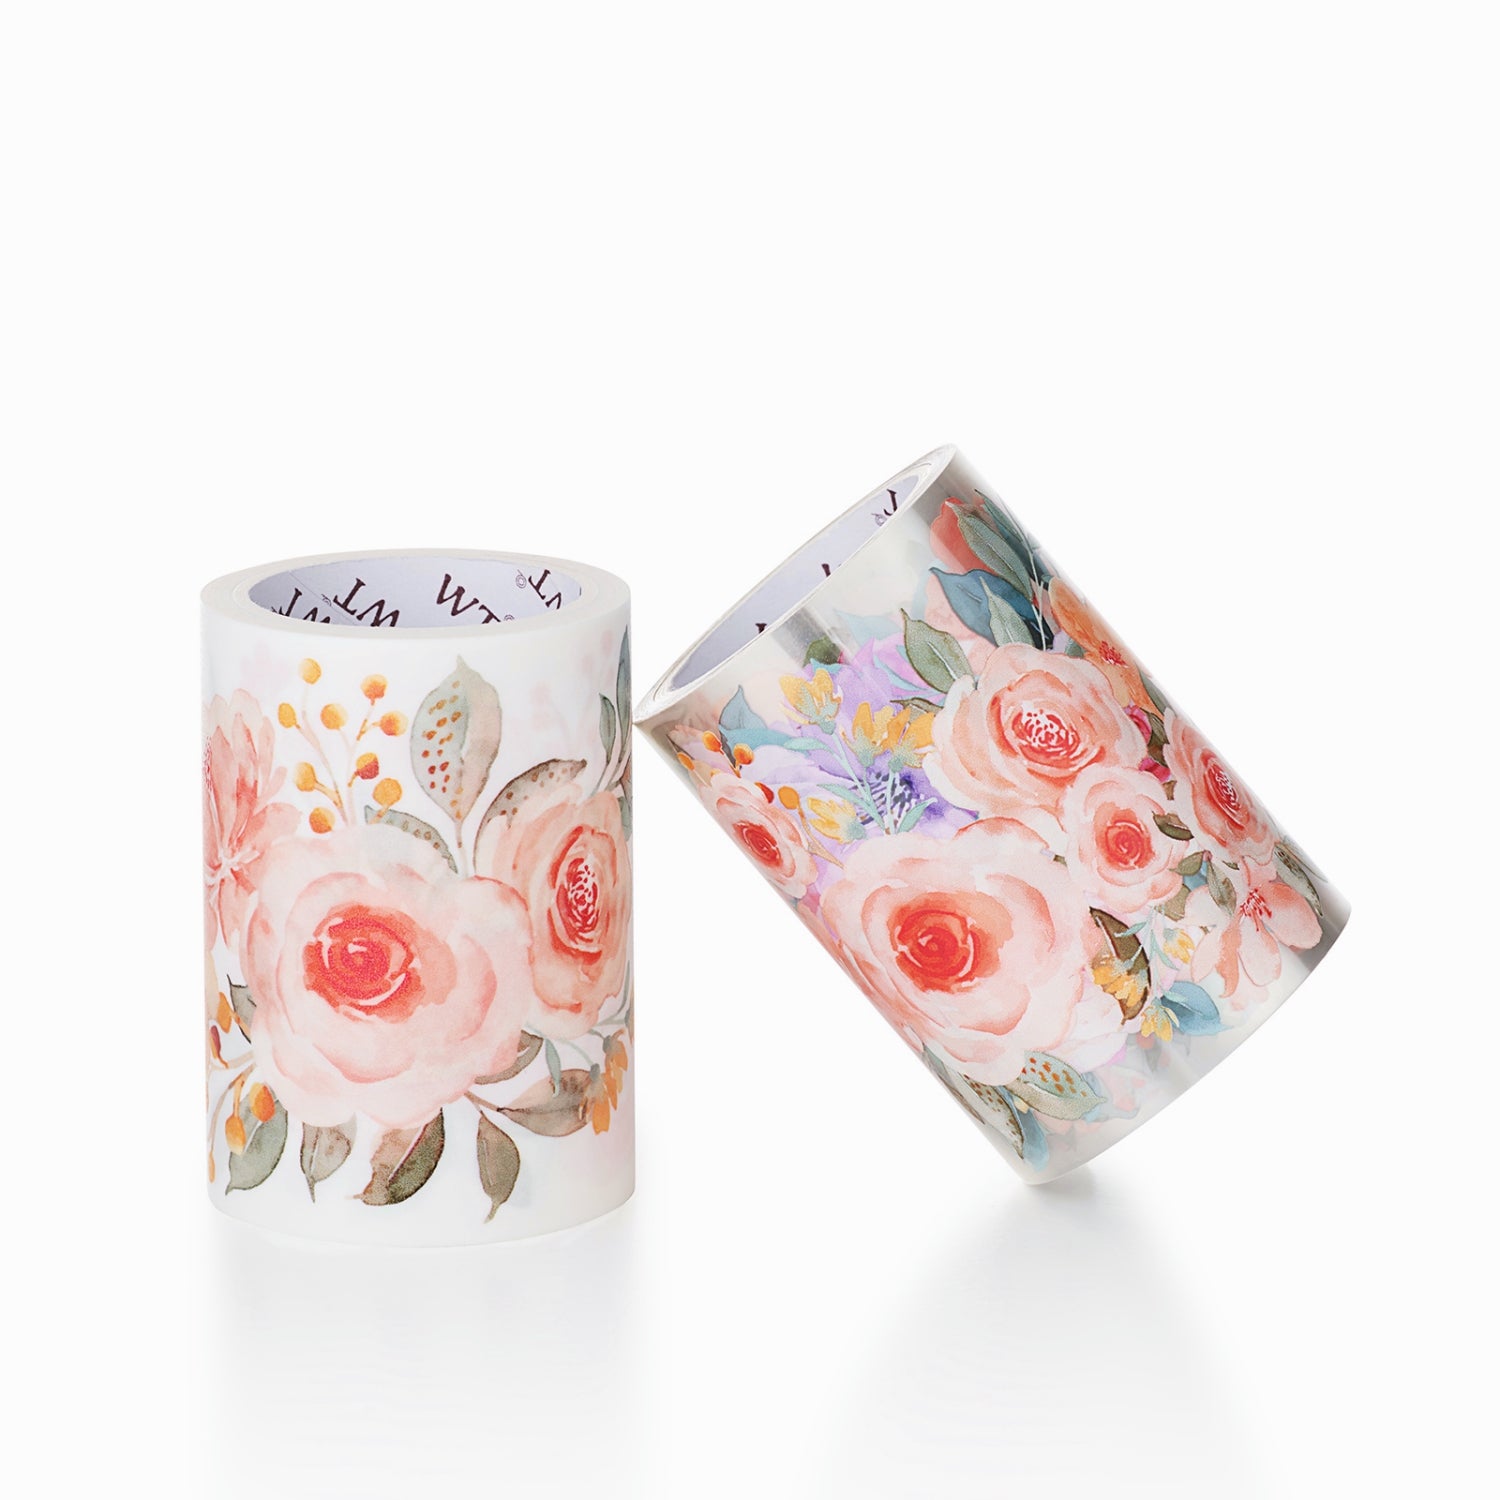 Literary Flower and Girl Character PET Washi Tape 7cm*2M roll – Team Black  Store